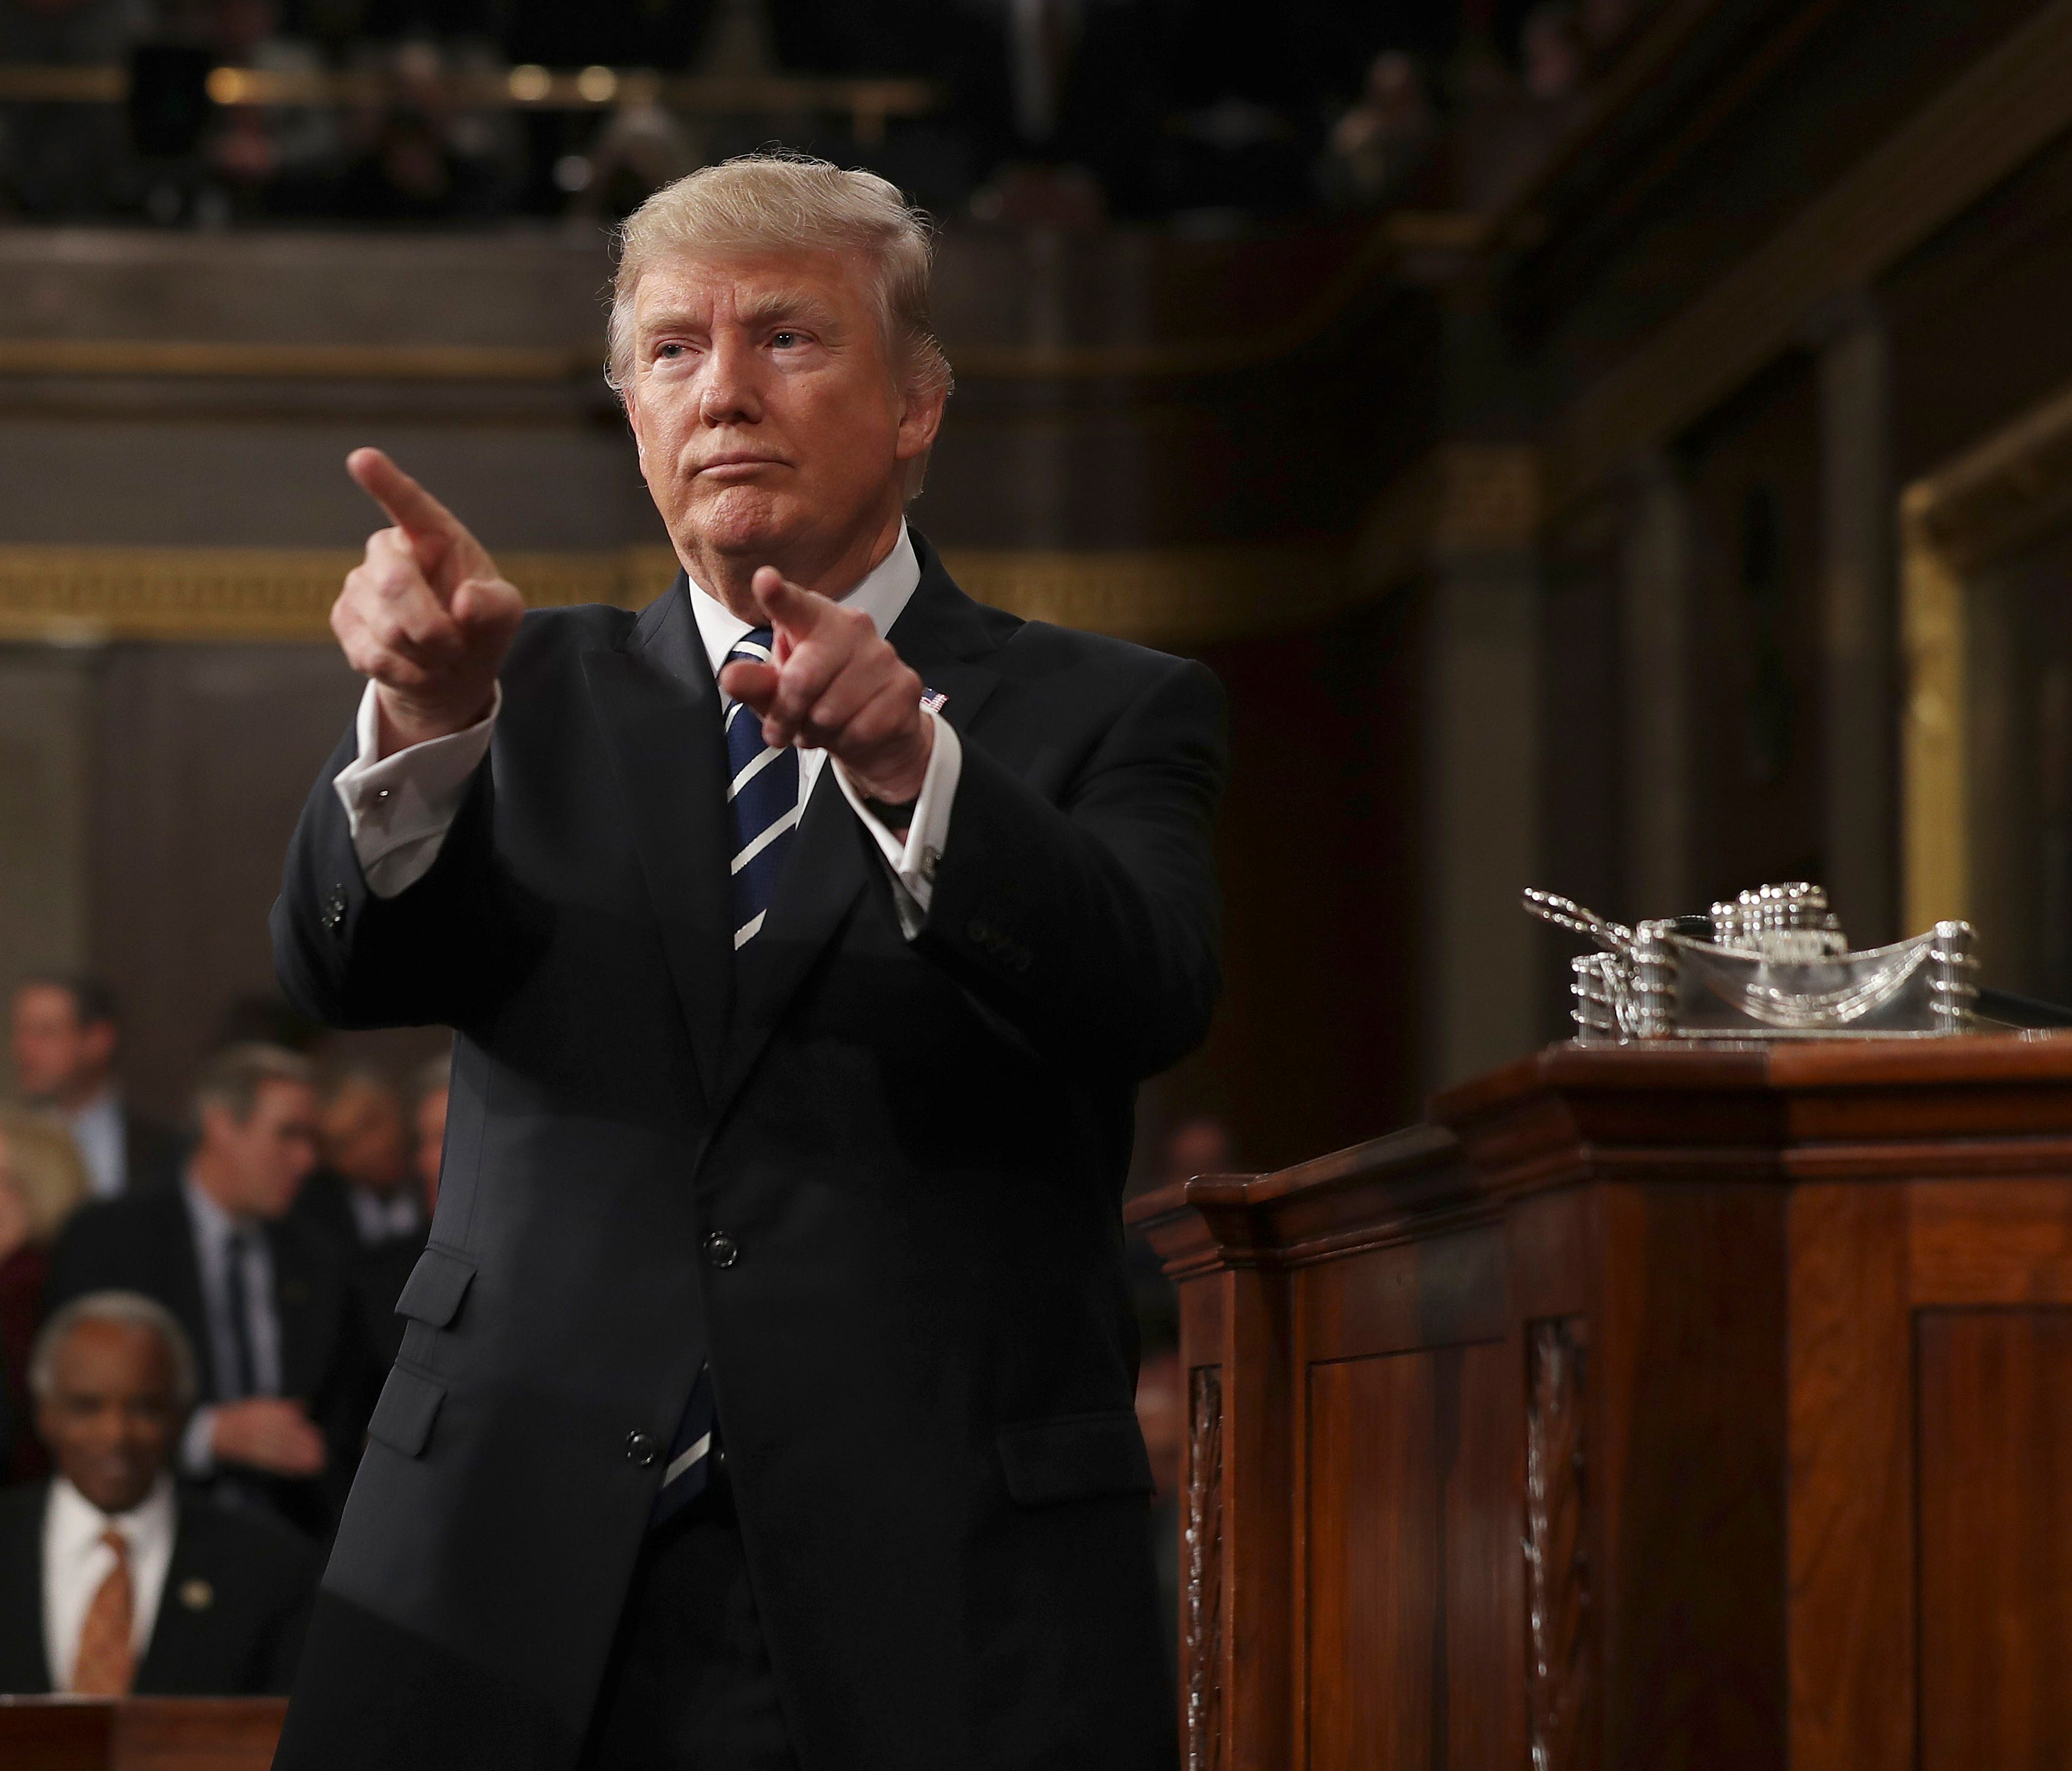 President Trump reacts after delivering his first address to a joint session of Congress from the floor of the House of Representatives in Washington, D.C., on Feb. 28, 2017.